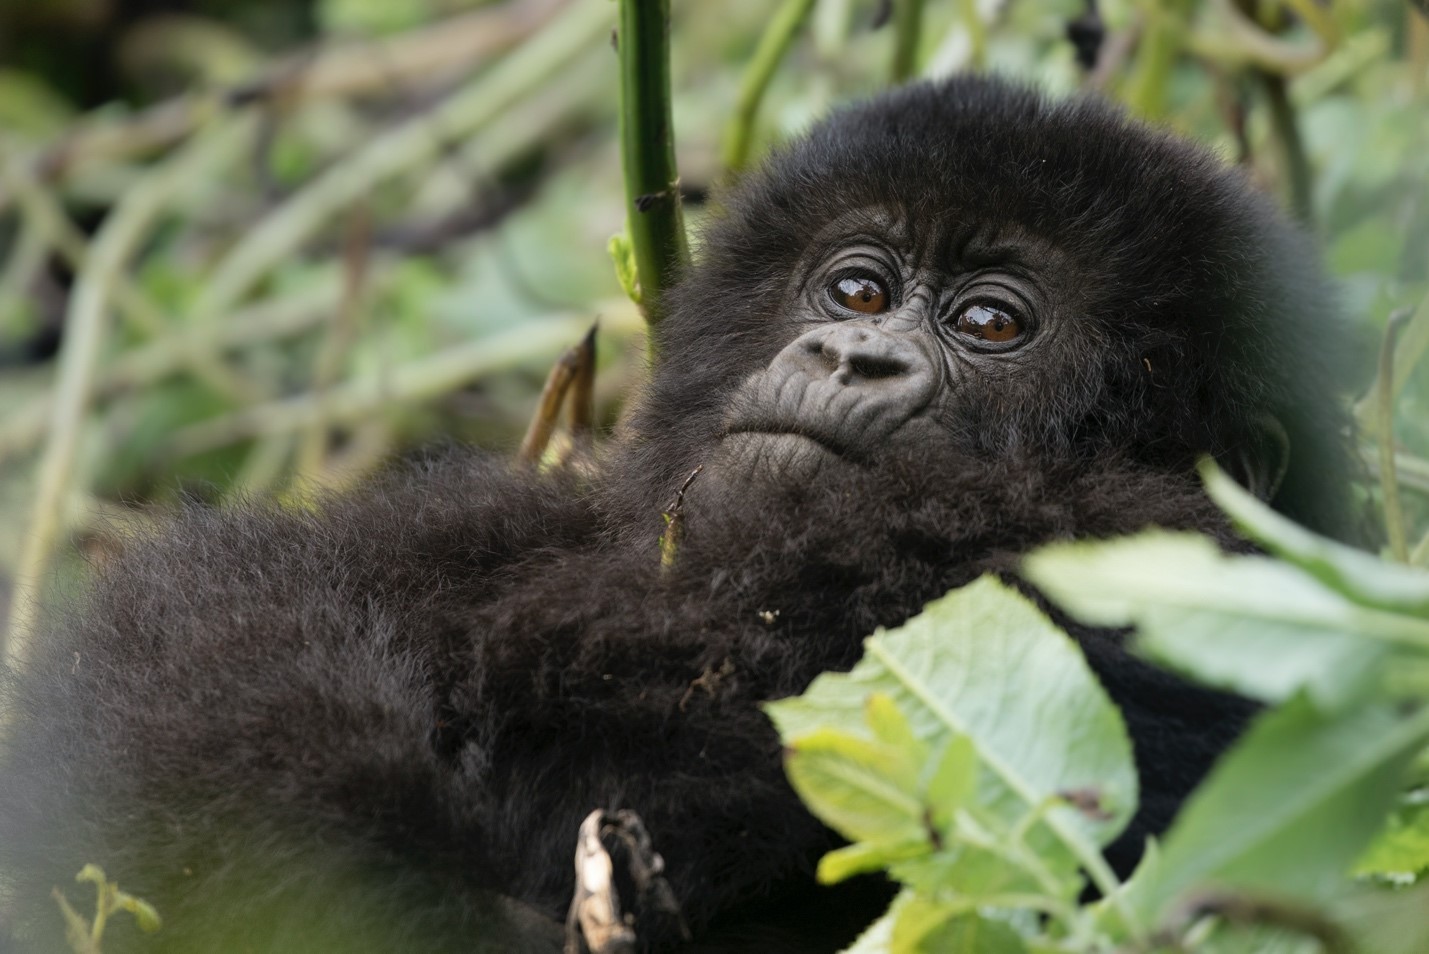 a young gorilla rests in the foliage of the jungle